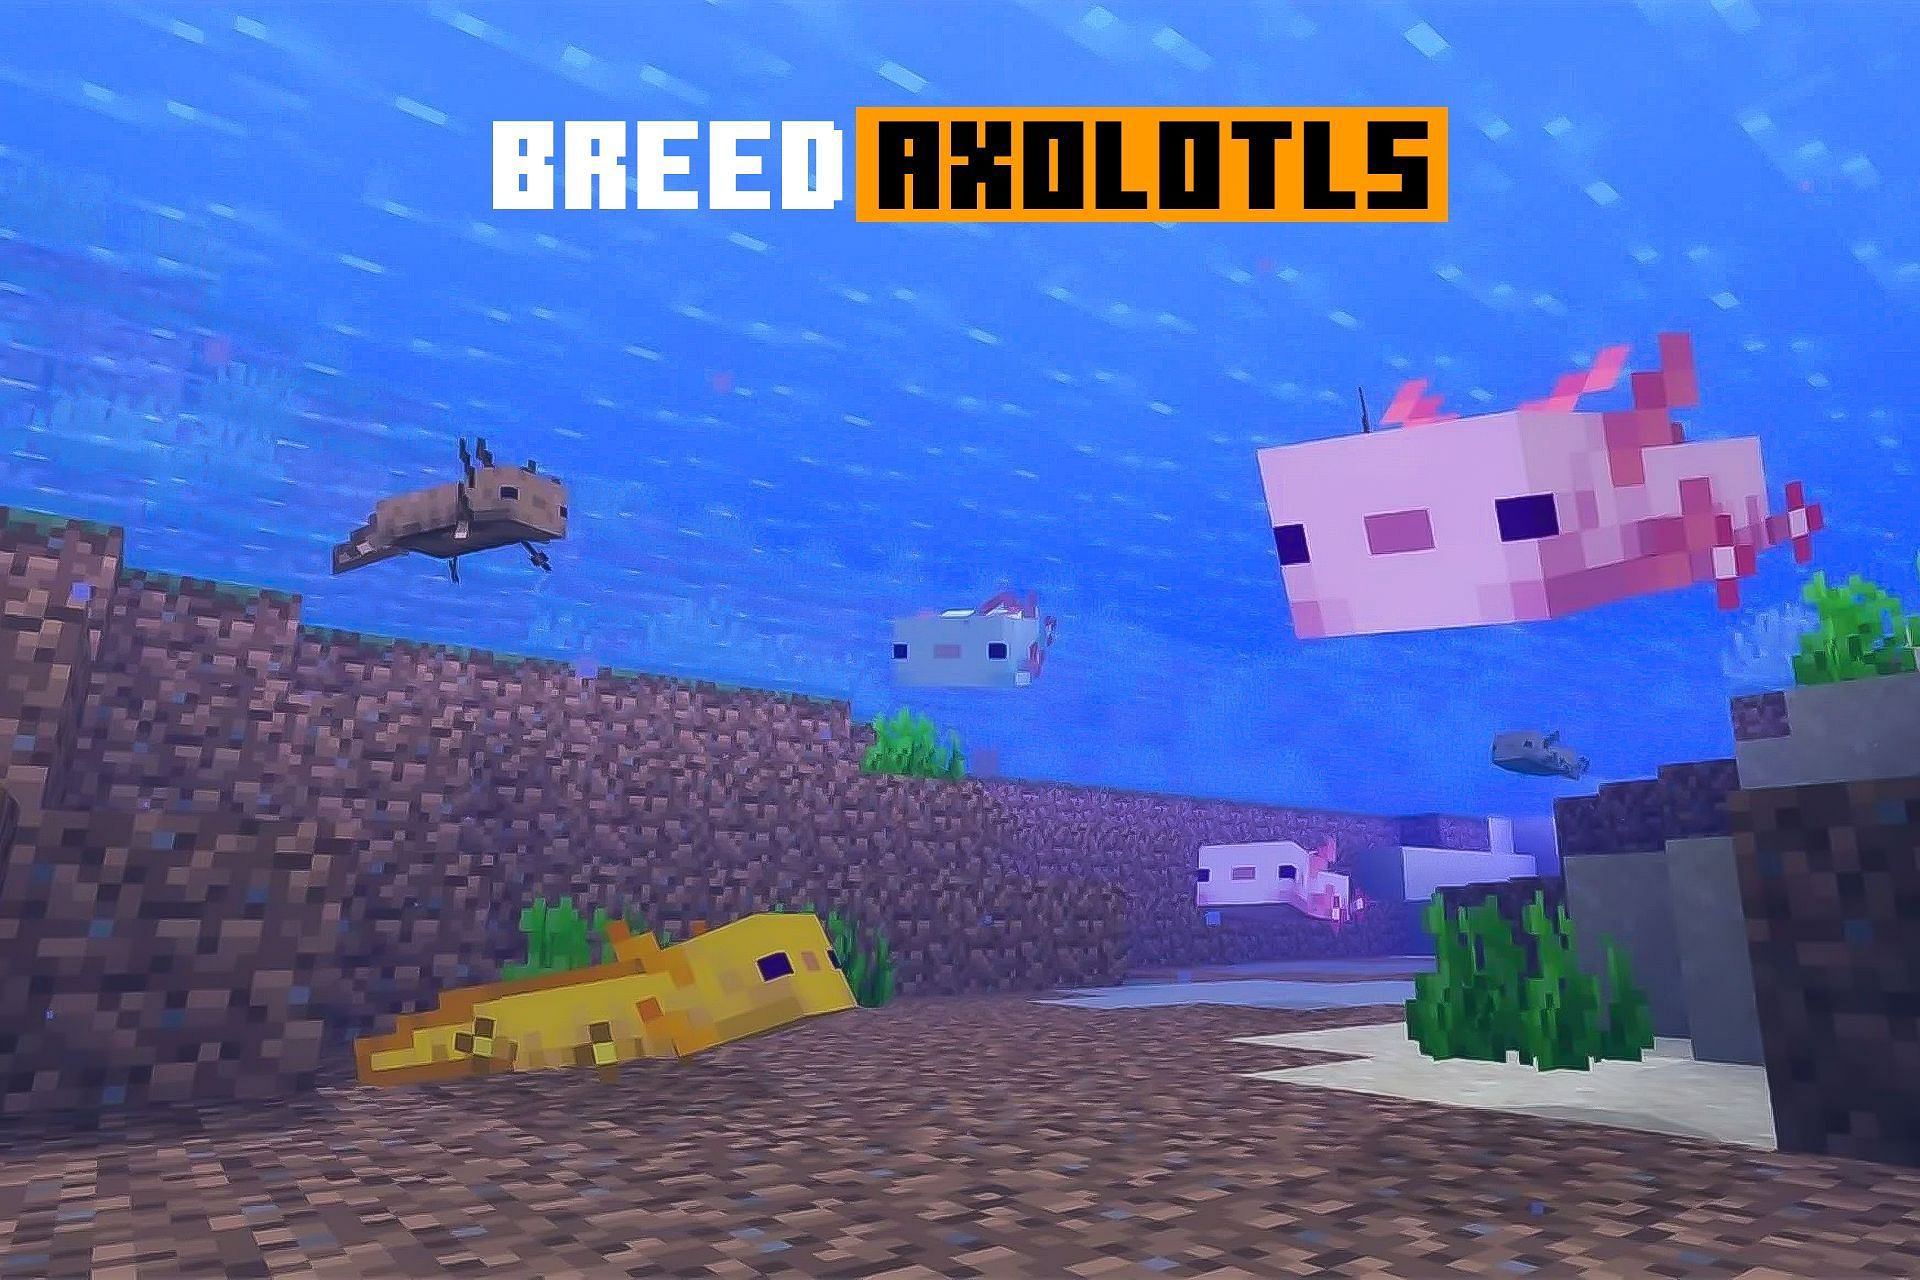 Axolotl are among the different mobs present in Minecraft (Image via Sportskeeda)